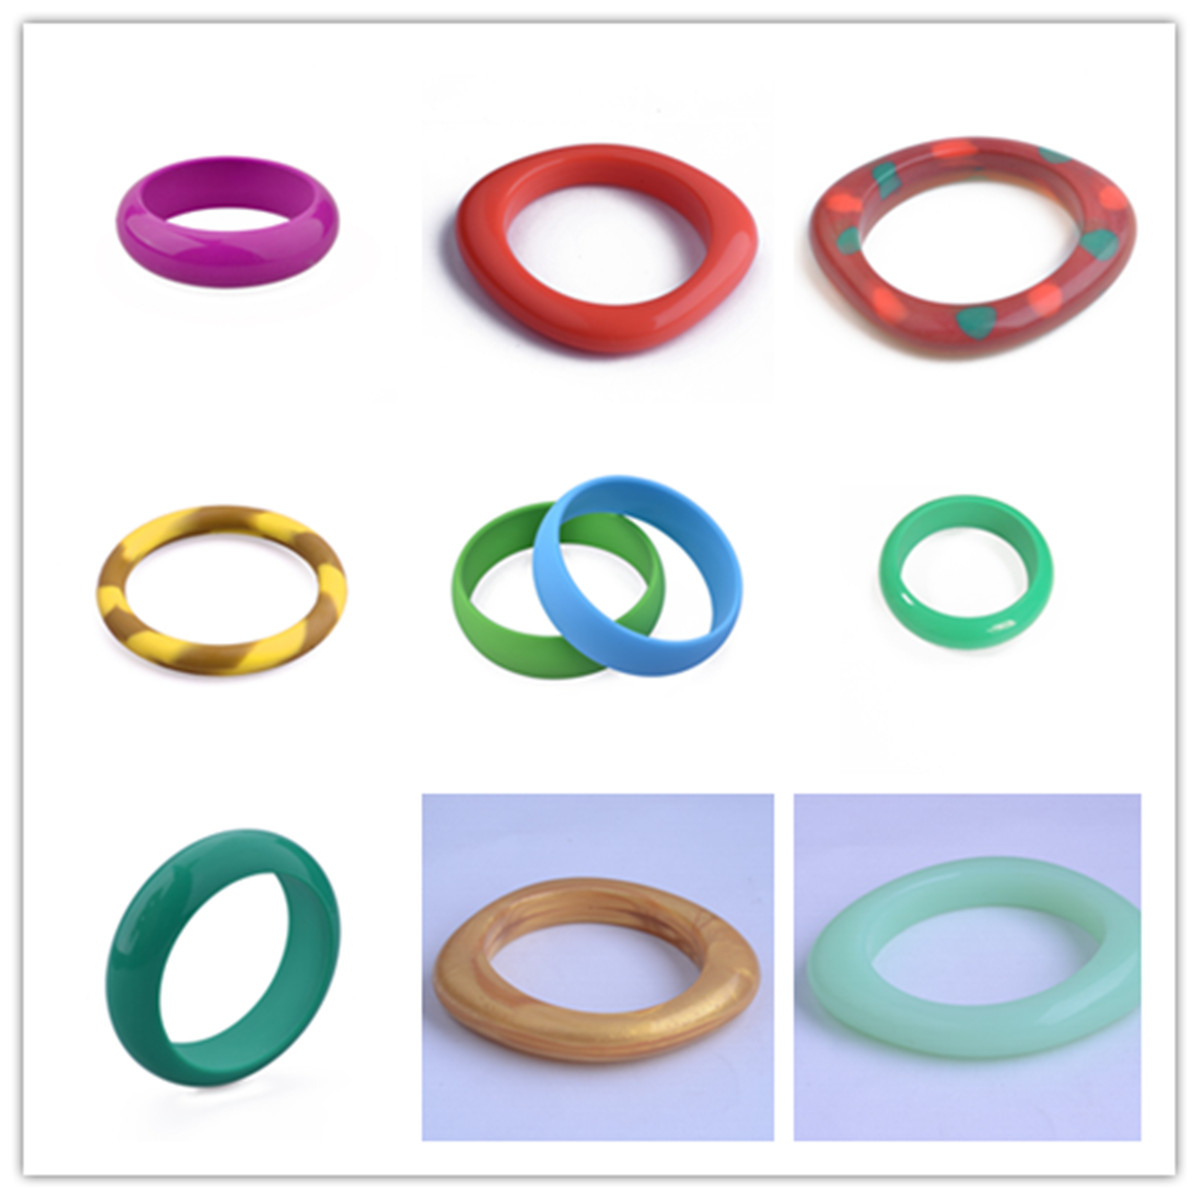  High Quality Silicone ring bangles for baby teething 3